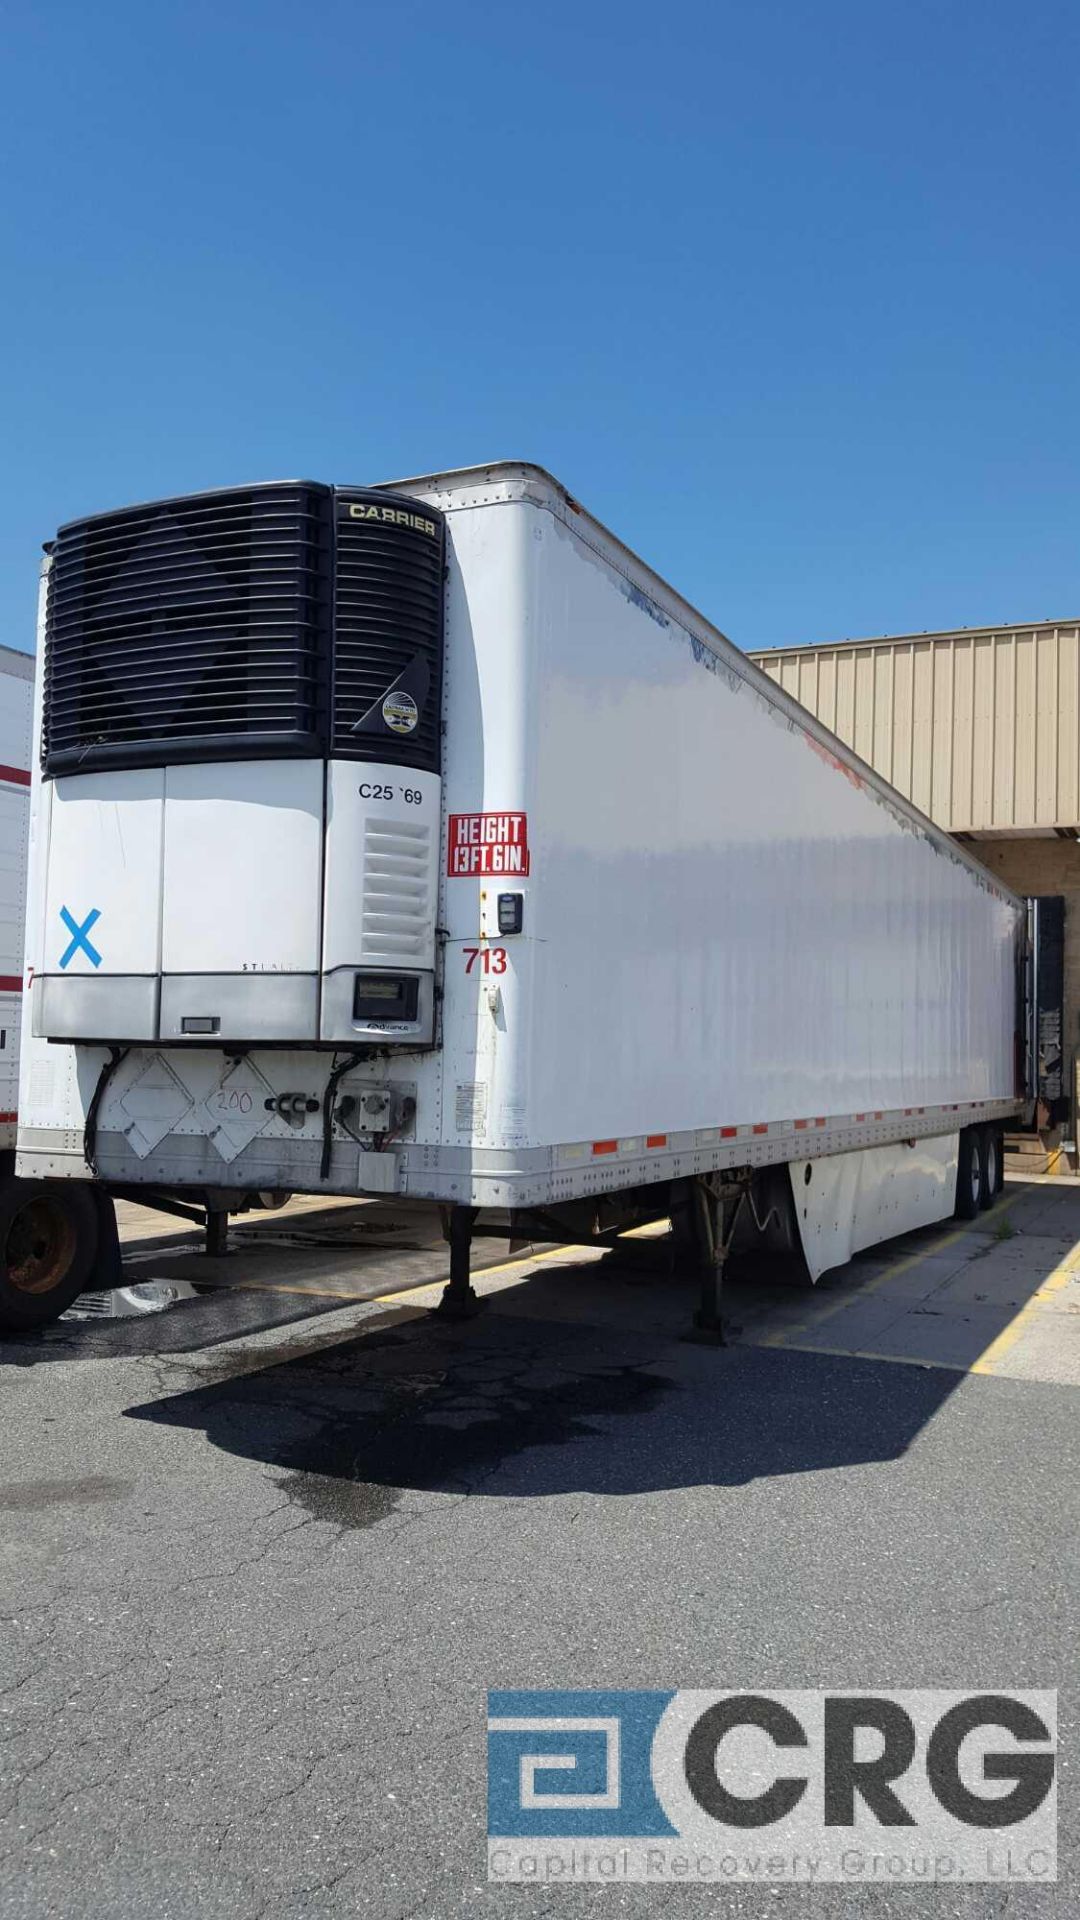 2007 Wabash Multi Temp Refrigerated Semi Trailer - 53 Long, 15356 hours, 6 side doors, 3 curb & 3 - Image 2 of 4